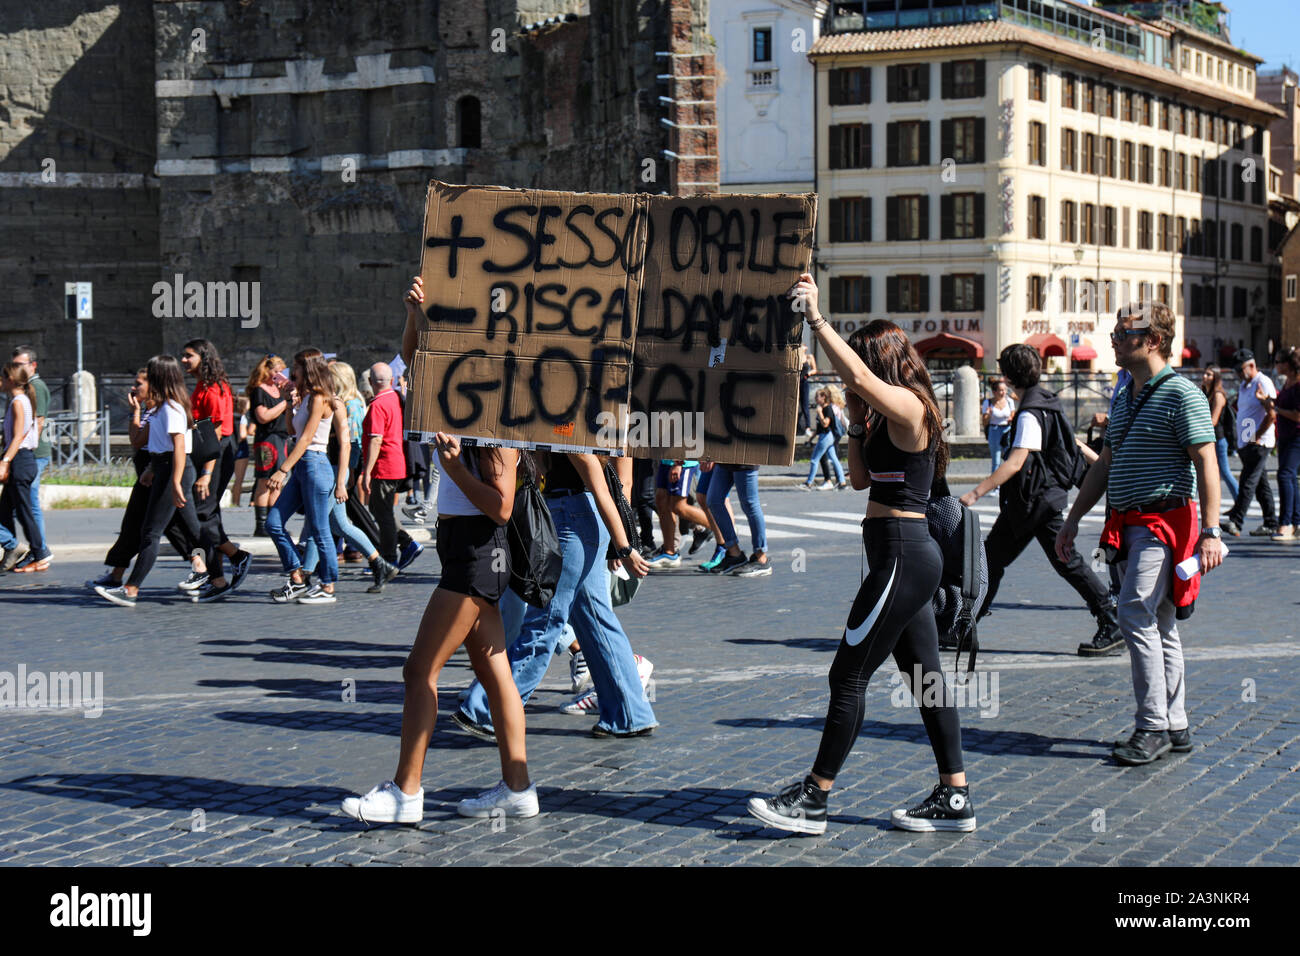 27 Sep 2019. Fridays for future. School strike for climate. Italian teenagers with a cardboard placard in Rome, Italy. Stock Photo